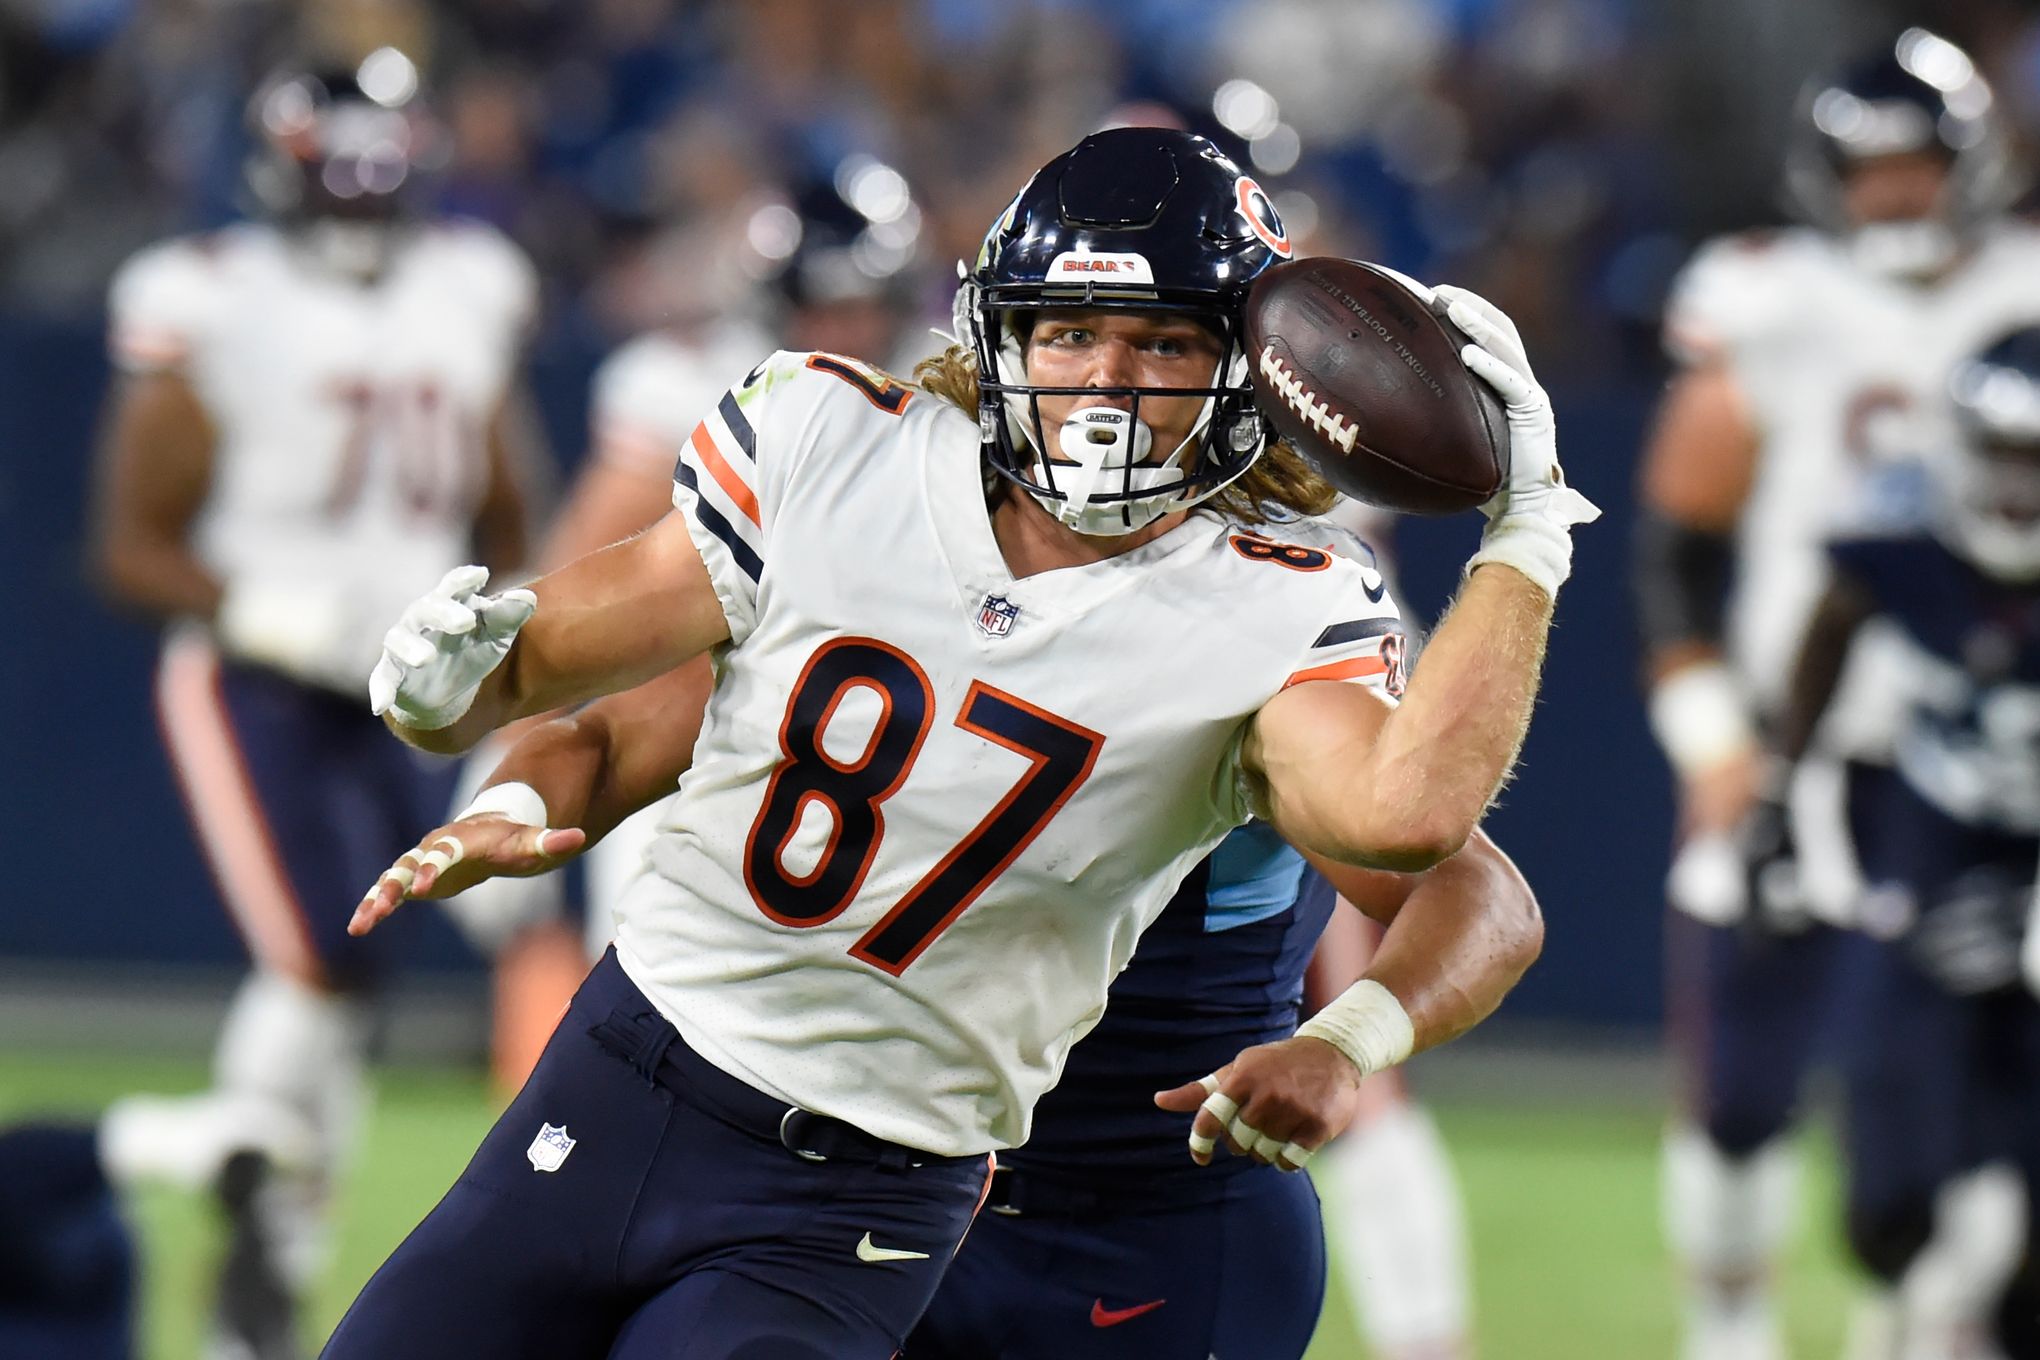 Chicago Bears and Los Angeles Rams played preseason game in Nashville